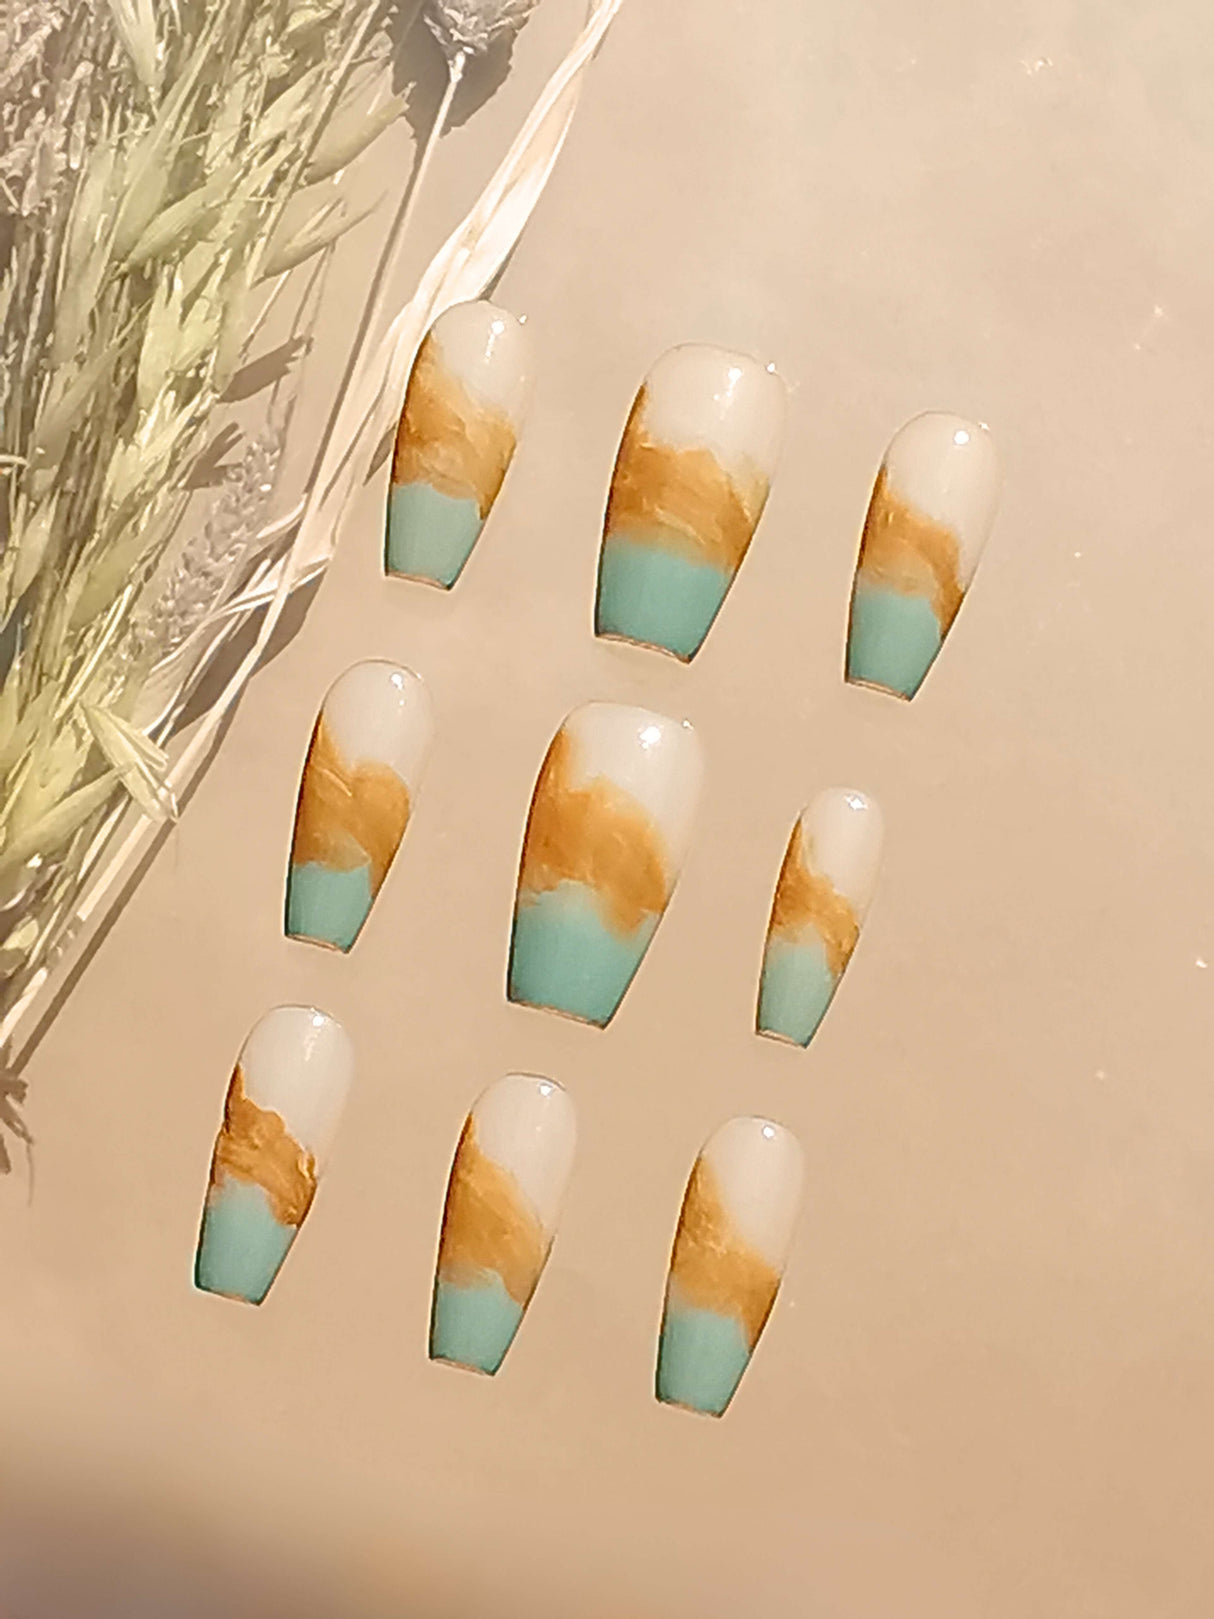 These long, coffin or ballerina-shaped nails feature a layered, abstract design resembling a landscape or geode. They are ideal for adding an artistic touch to a manicure.